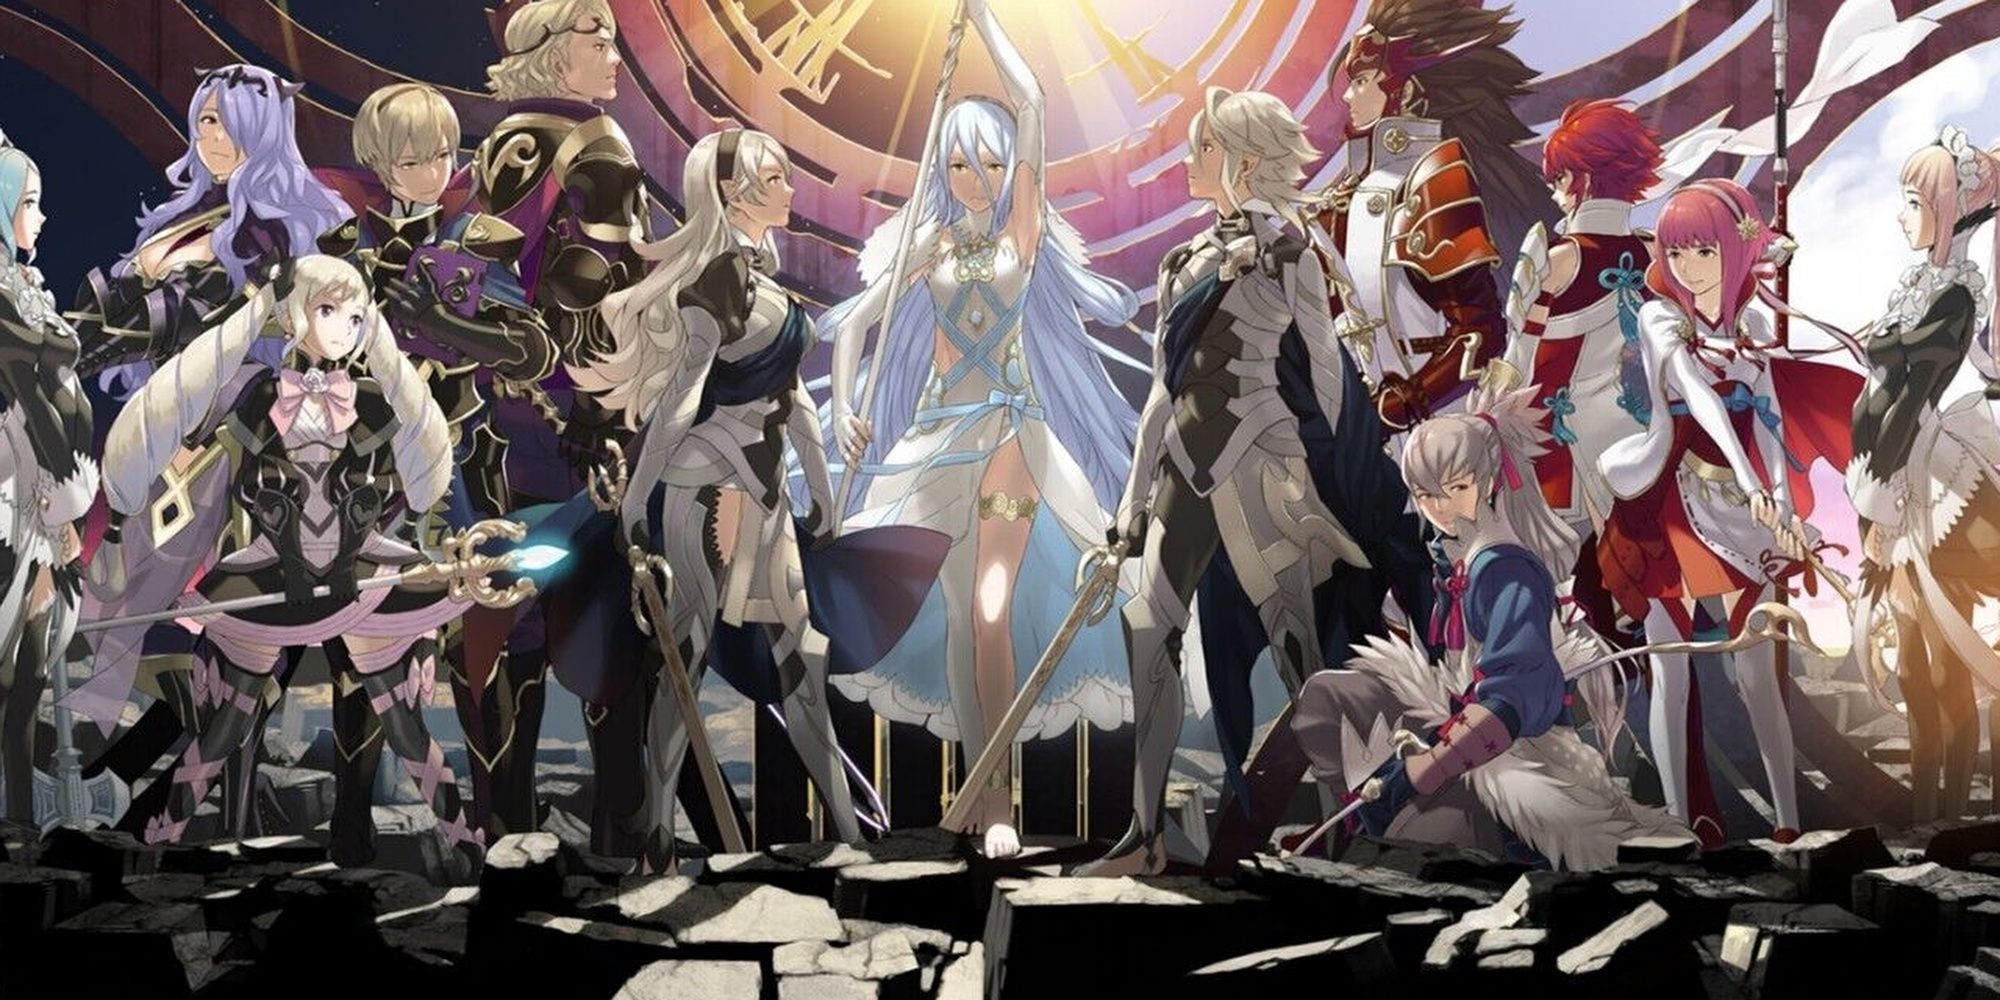 Promotional image of the Fates of Fire Emblem